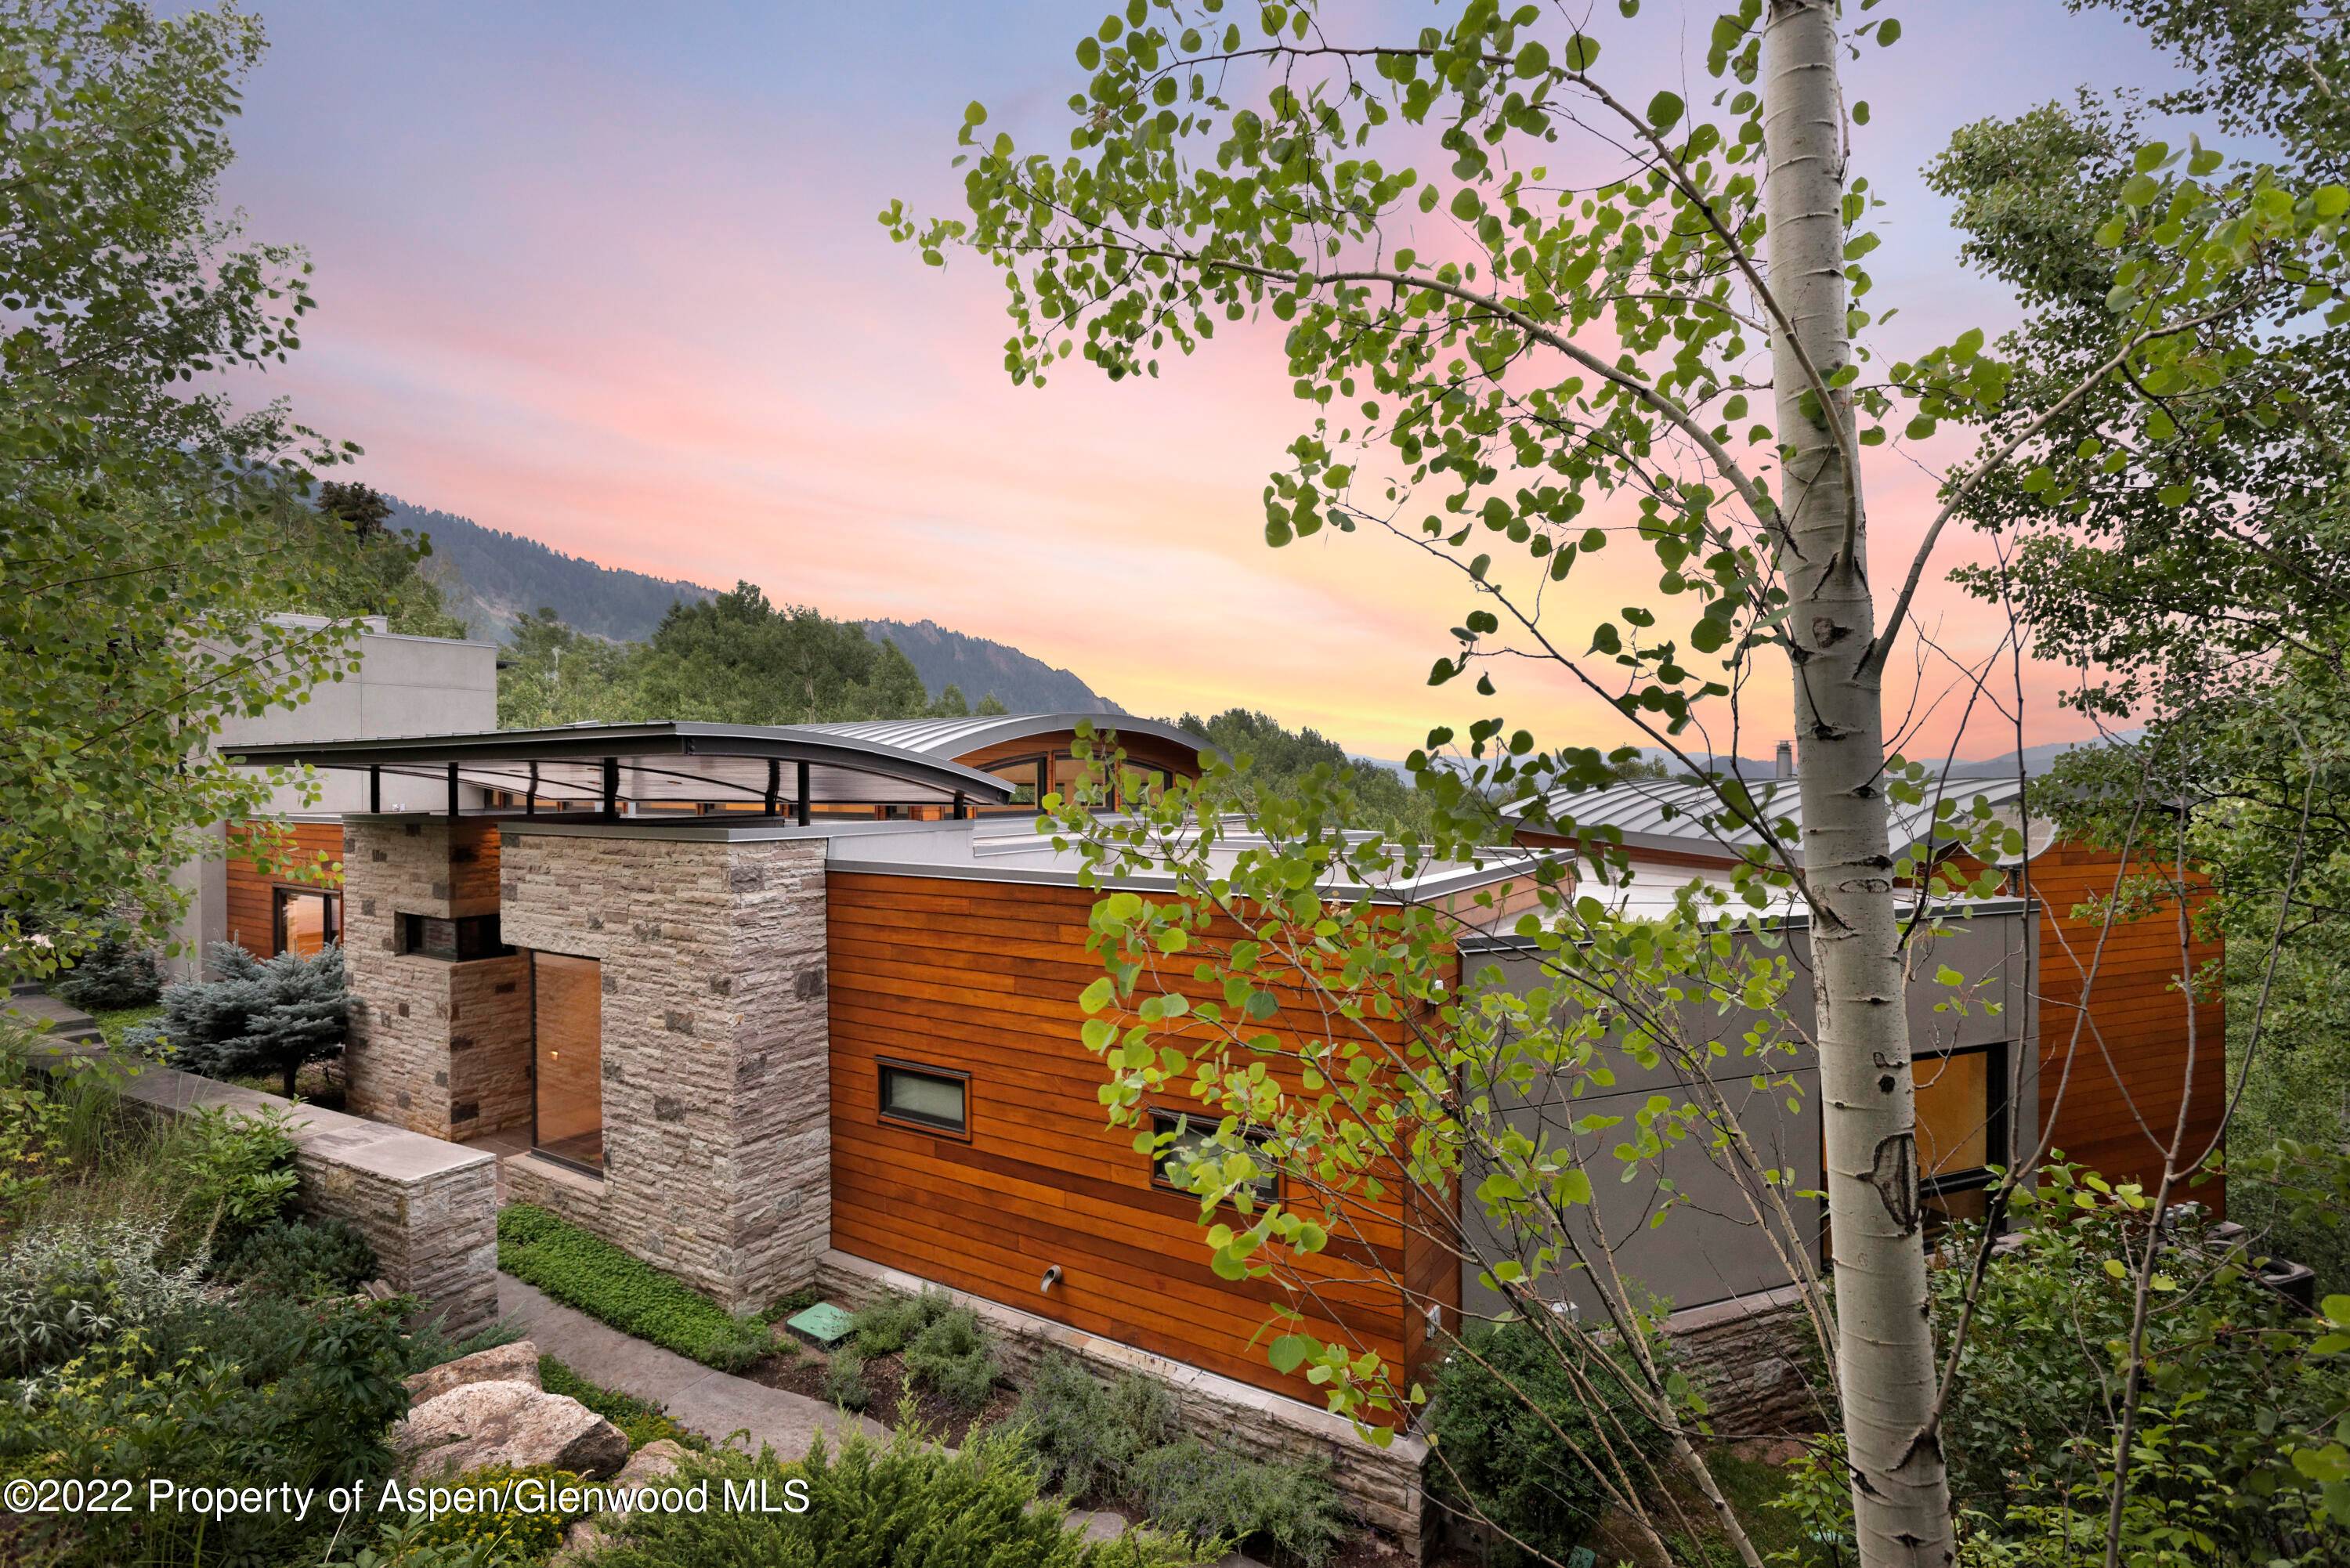 Perfectly nestled in between iconic Aspen and Pine trees, this chic contemporary 4 bedroom 5 bath home is located less than one mile from Aspen's core providing the flexibility to ...